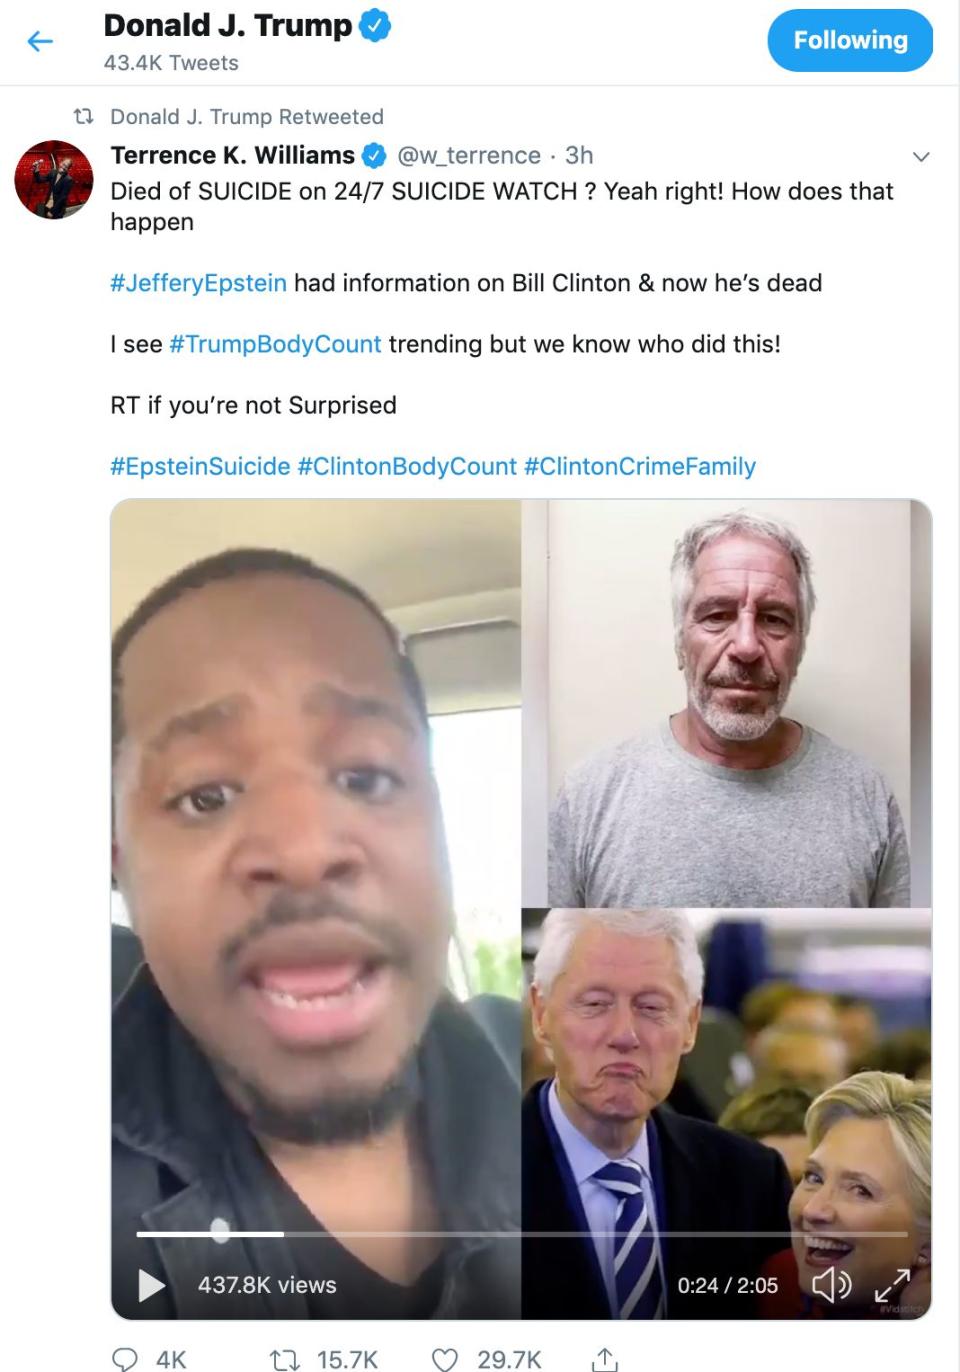 President Donald Trump retweeted this conspiracy theory linking the Clintons to Jeffrey Epstein's death. (Photo: <a href="https://twitter.com/w_terrence/status/1160256105399967744" target="_blank">Twitter</a>)